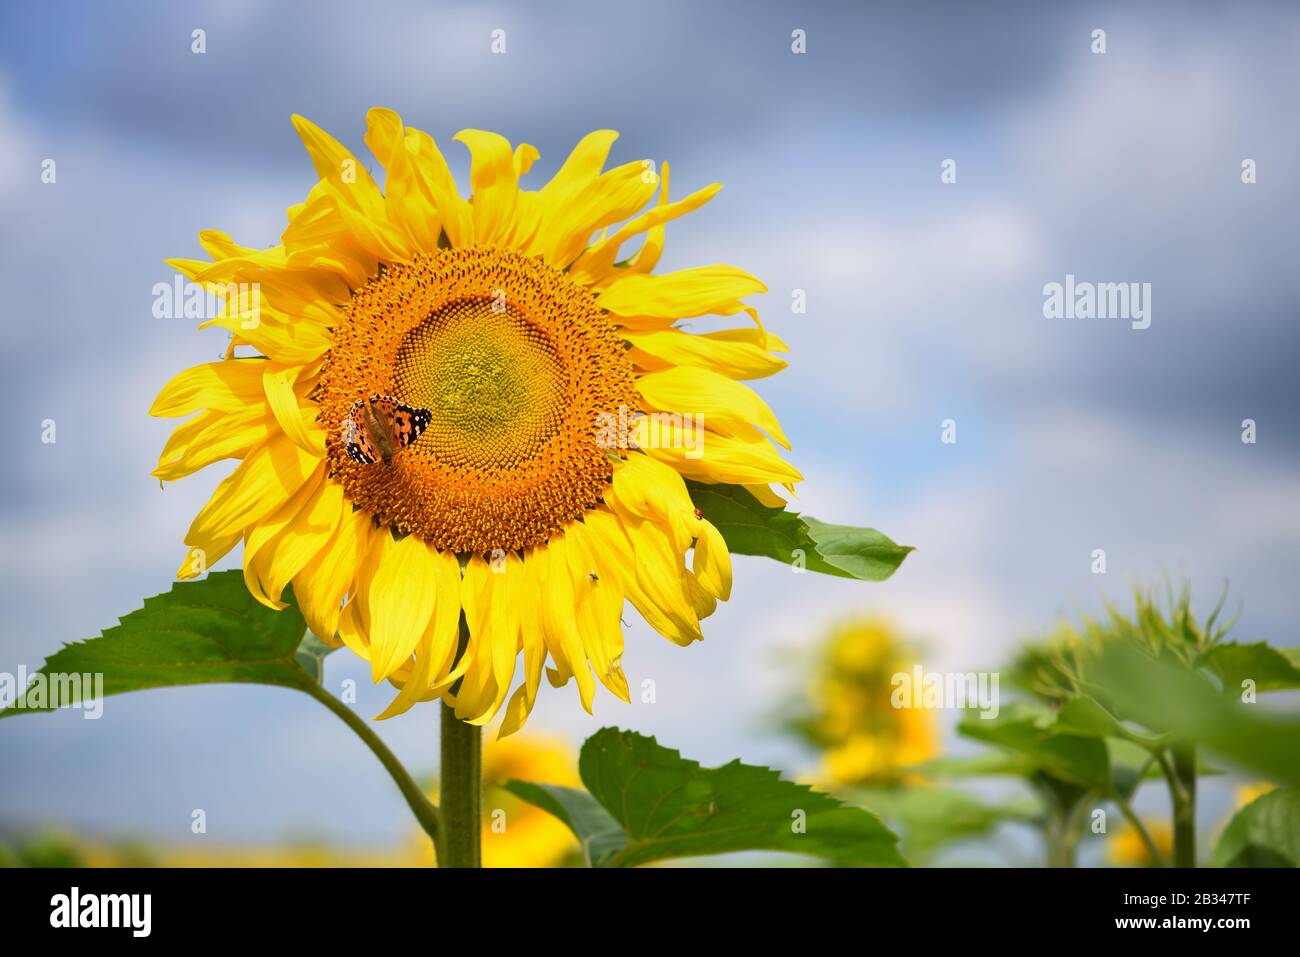 Sunflower flower against a background of blue sky with butterfly Stock Photo